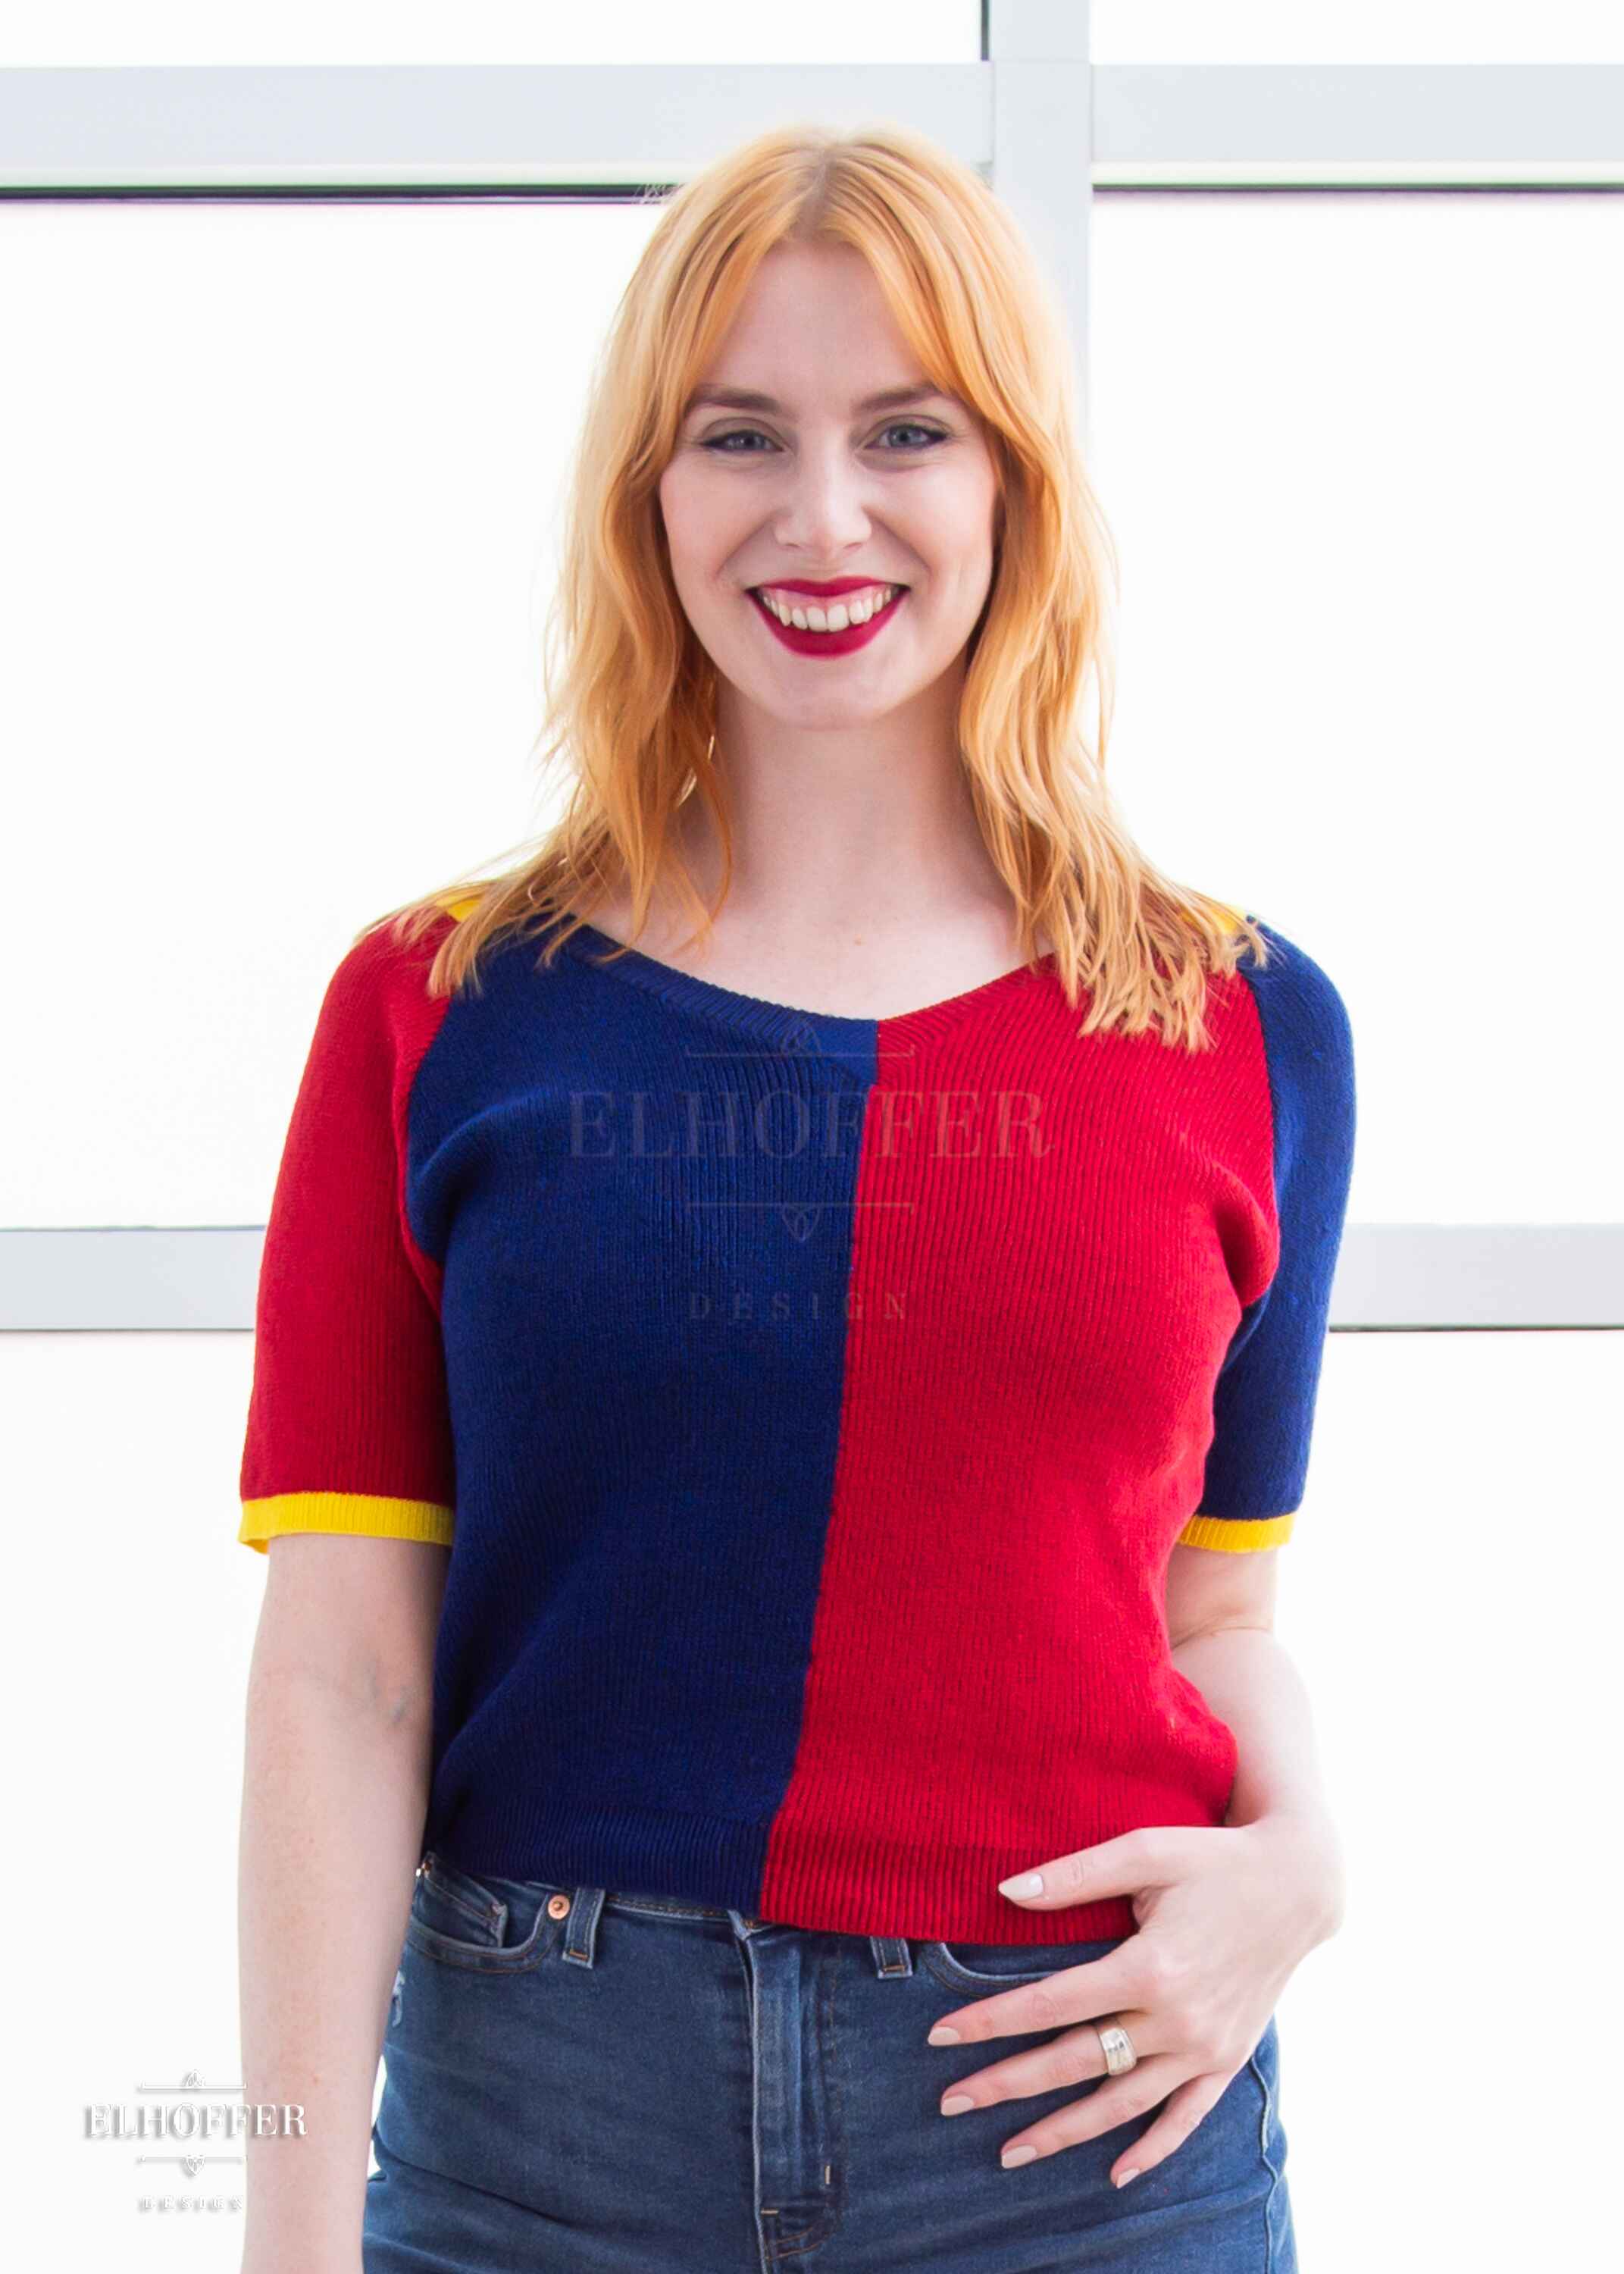 Harley, a fair skinned S model with shoulder length strawberry blonde hair, is smiling while wearing a short sleeve knit top with alternating blue and red colors. There is yellow detailing along the top of the shoulder and around the cuff of the sleeve.